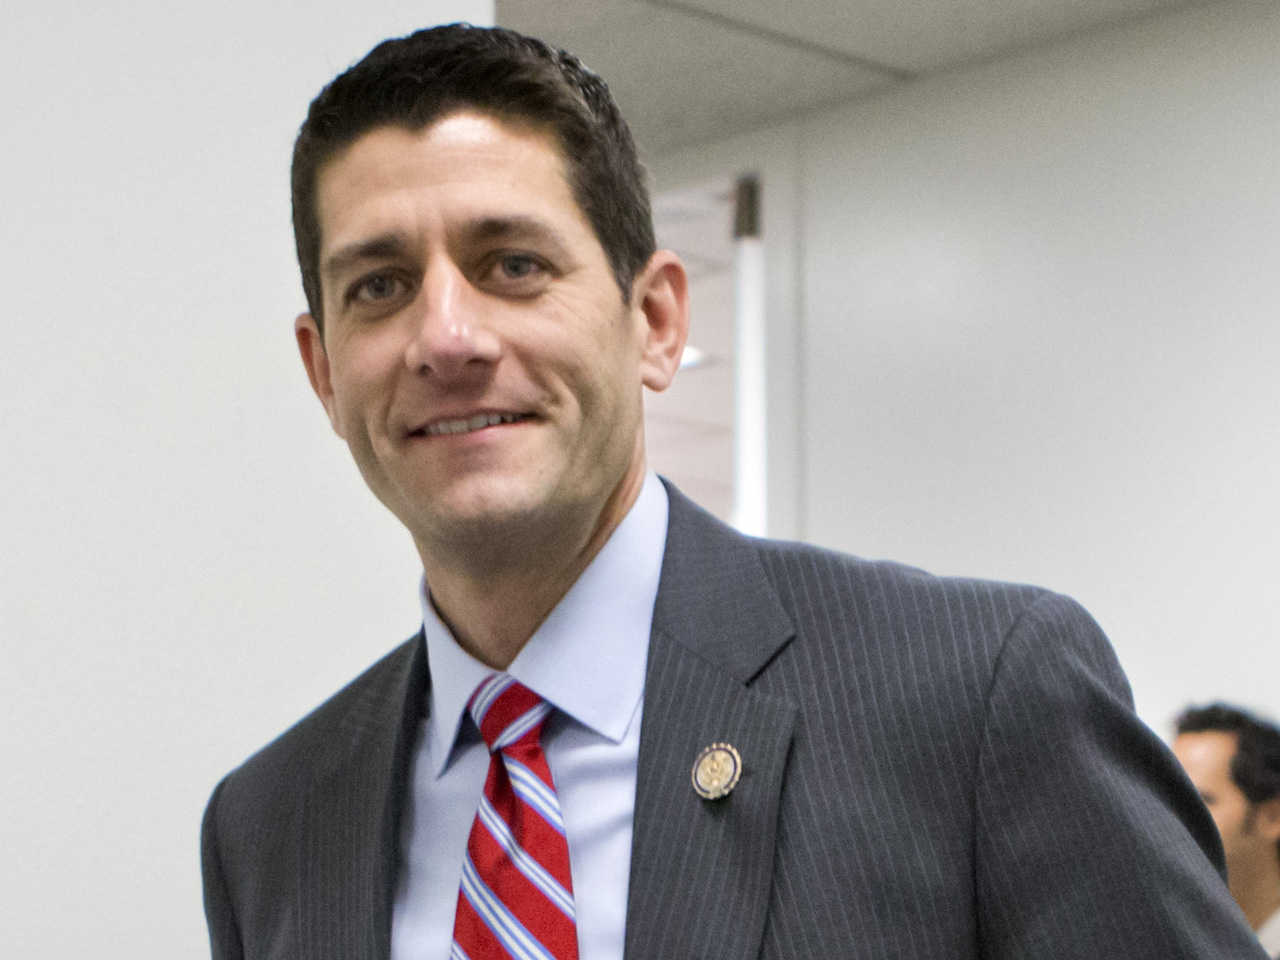 Paul Ryan spoke about the future of the Republican Party at the Kemp Award